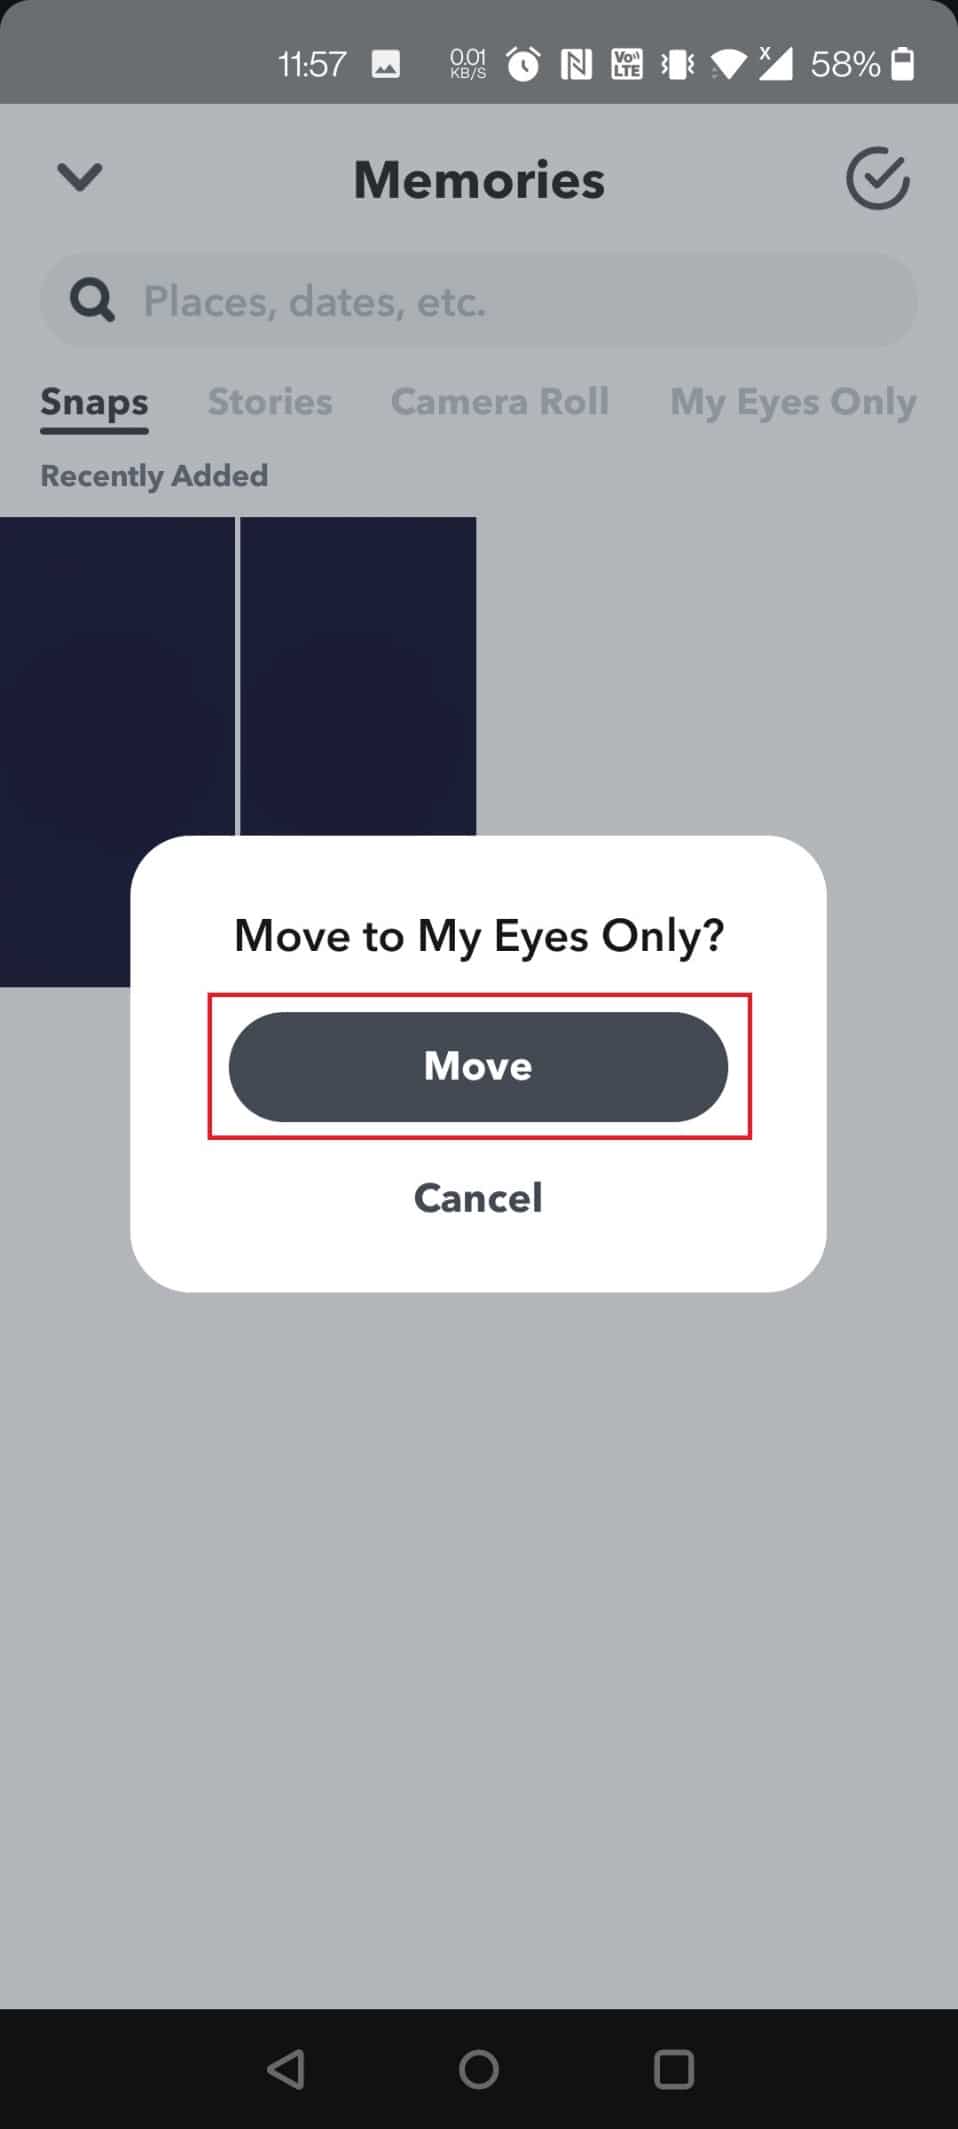 tap on Move in the pop-up | How to Get My Eyes Only on Snapchat